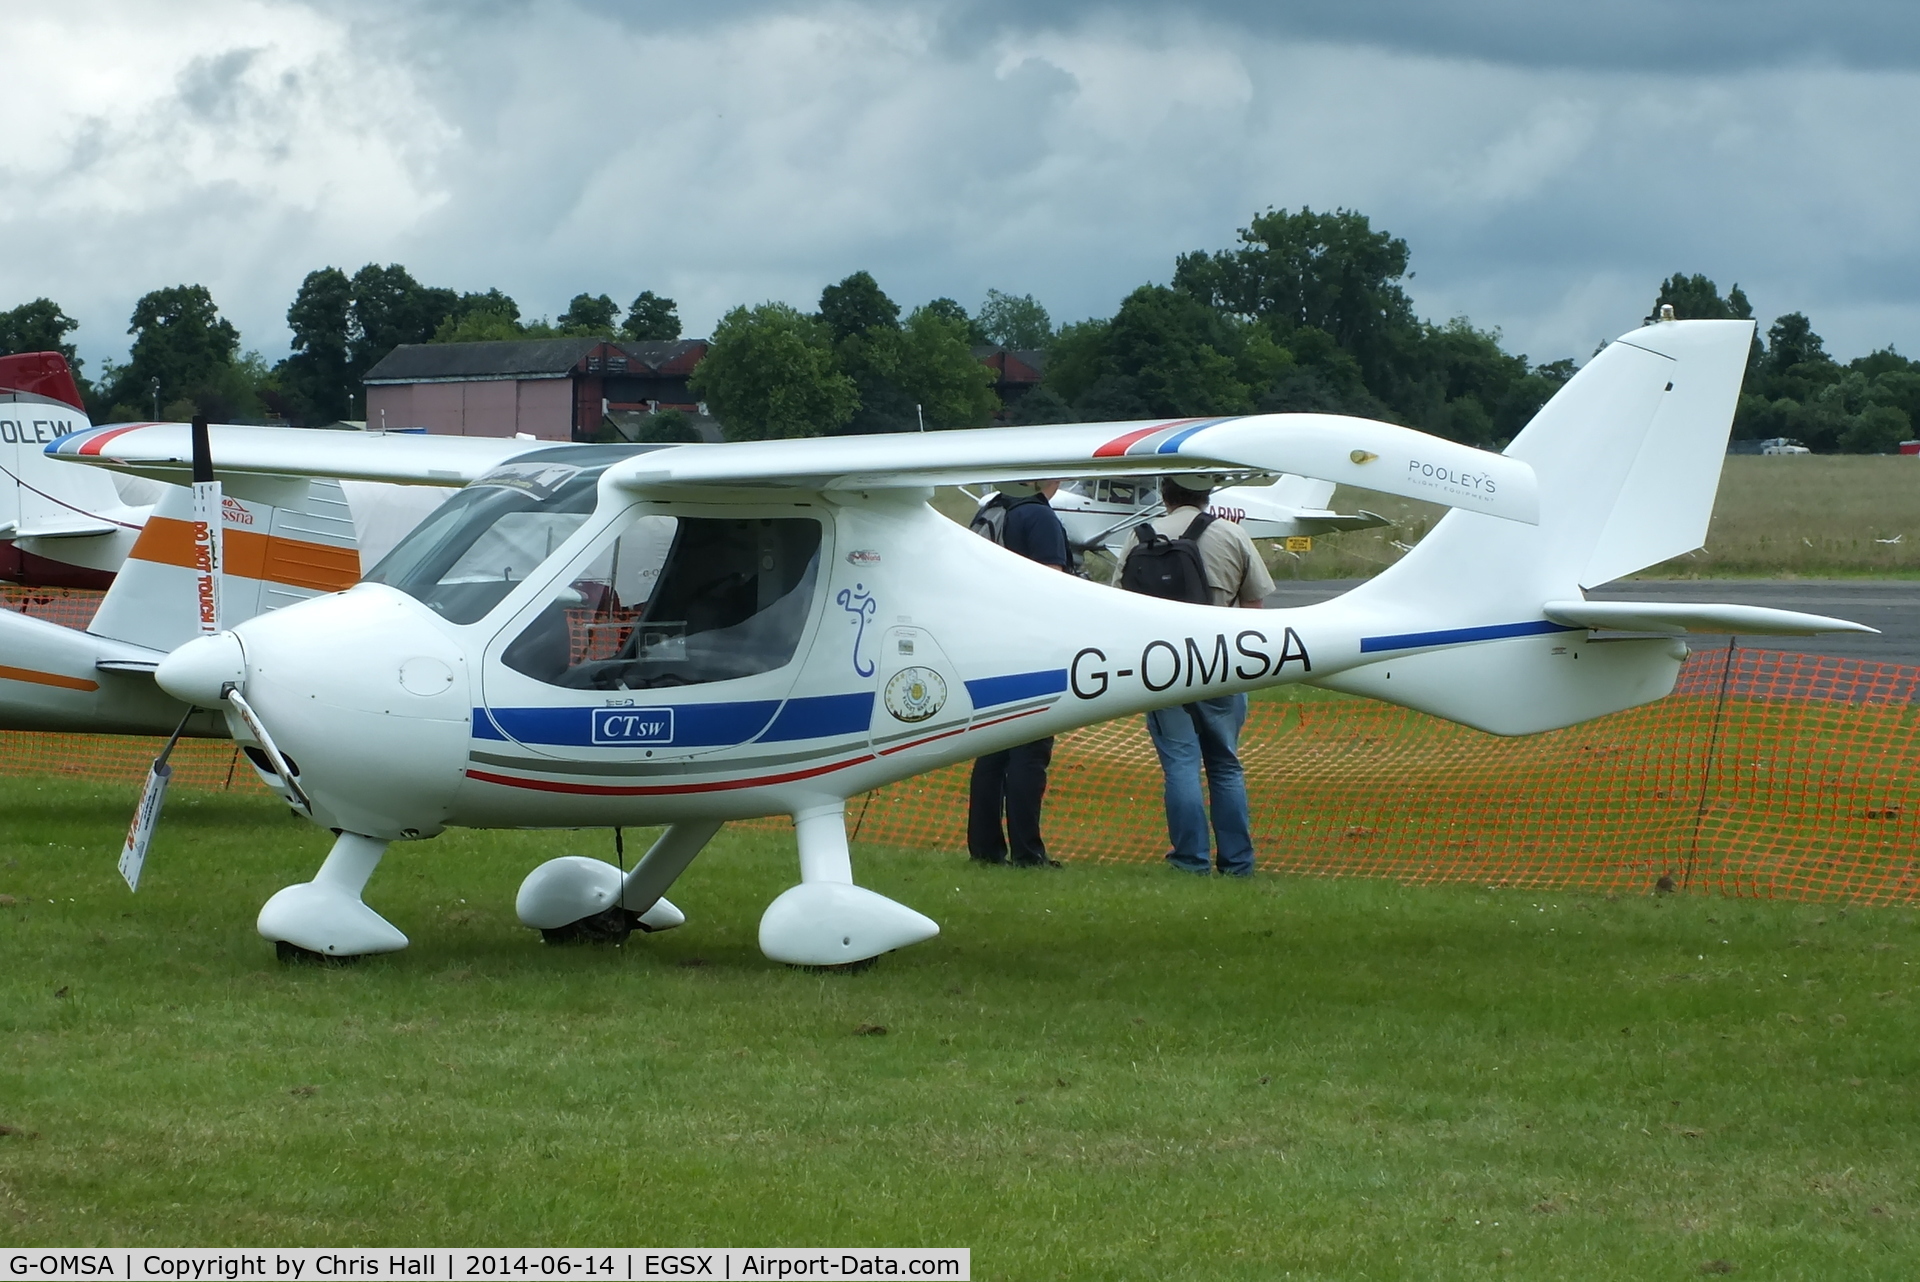 G-OMSA, 2009 Flight Design CTSW C/N 8501, at the Air Britain fly in